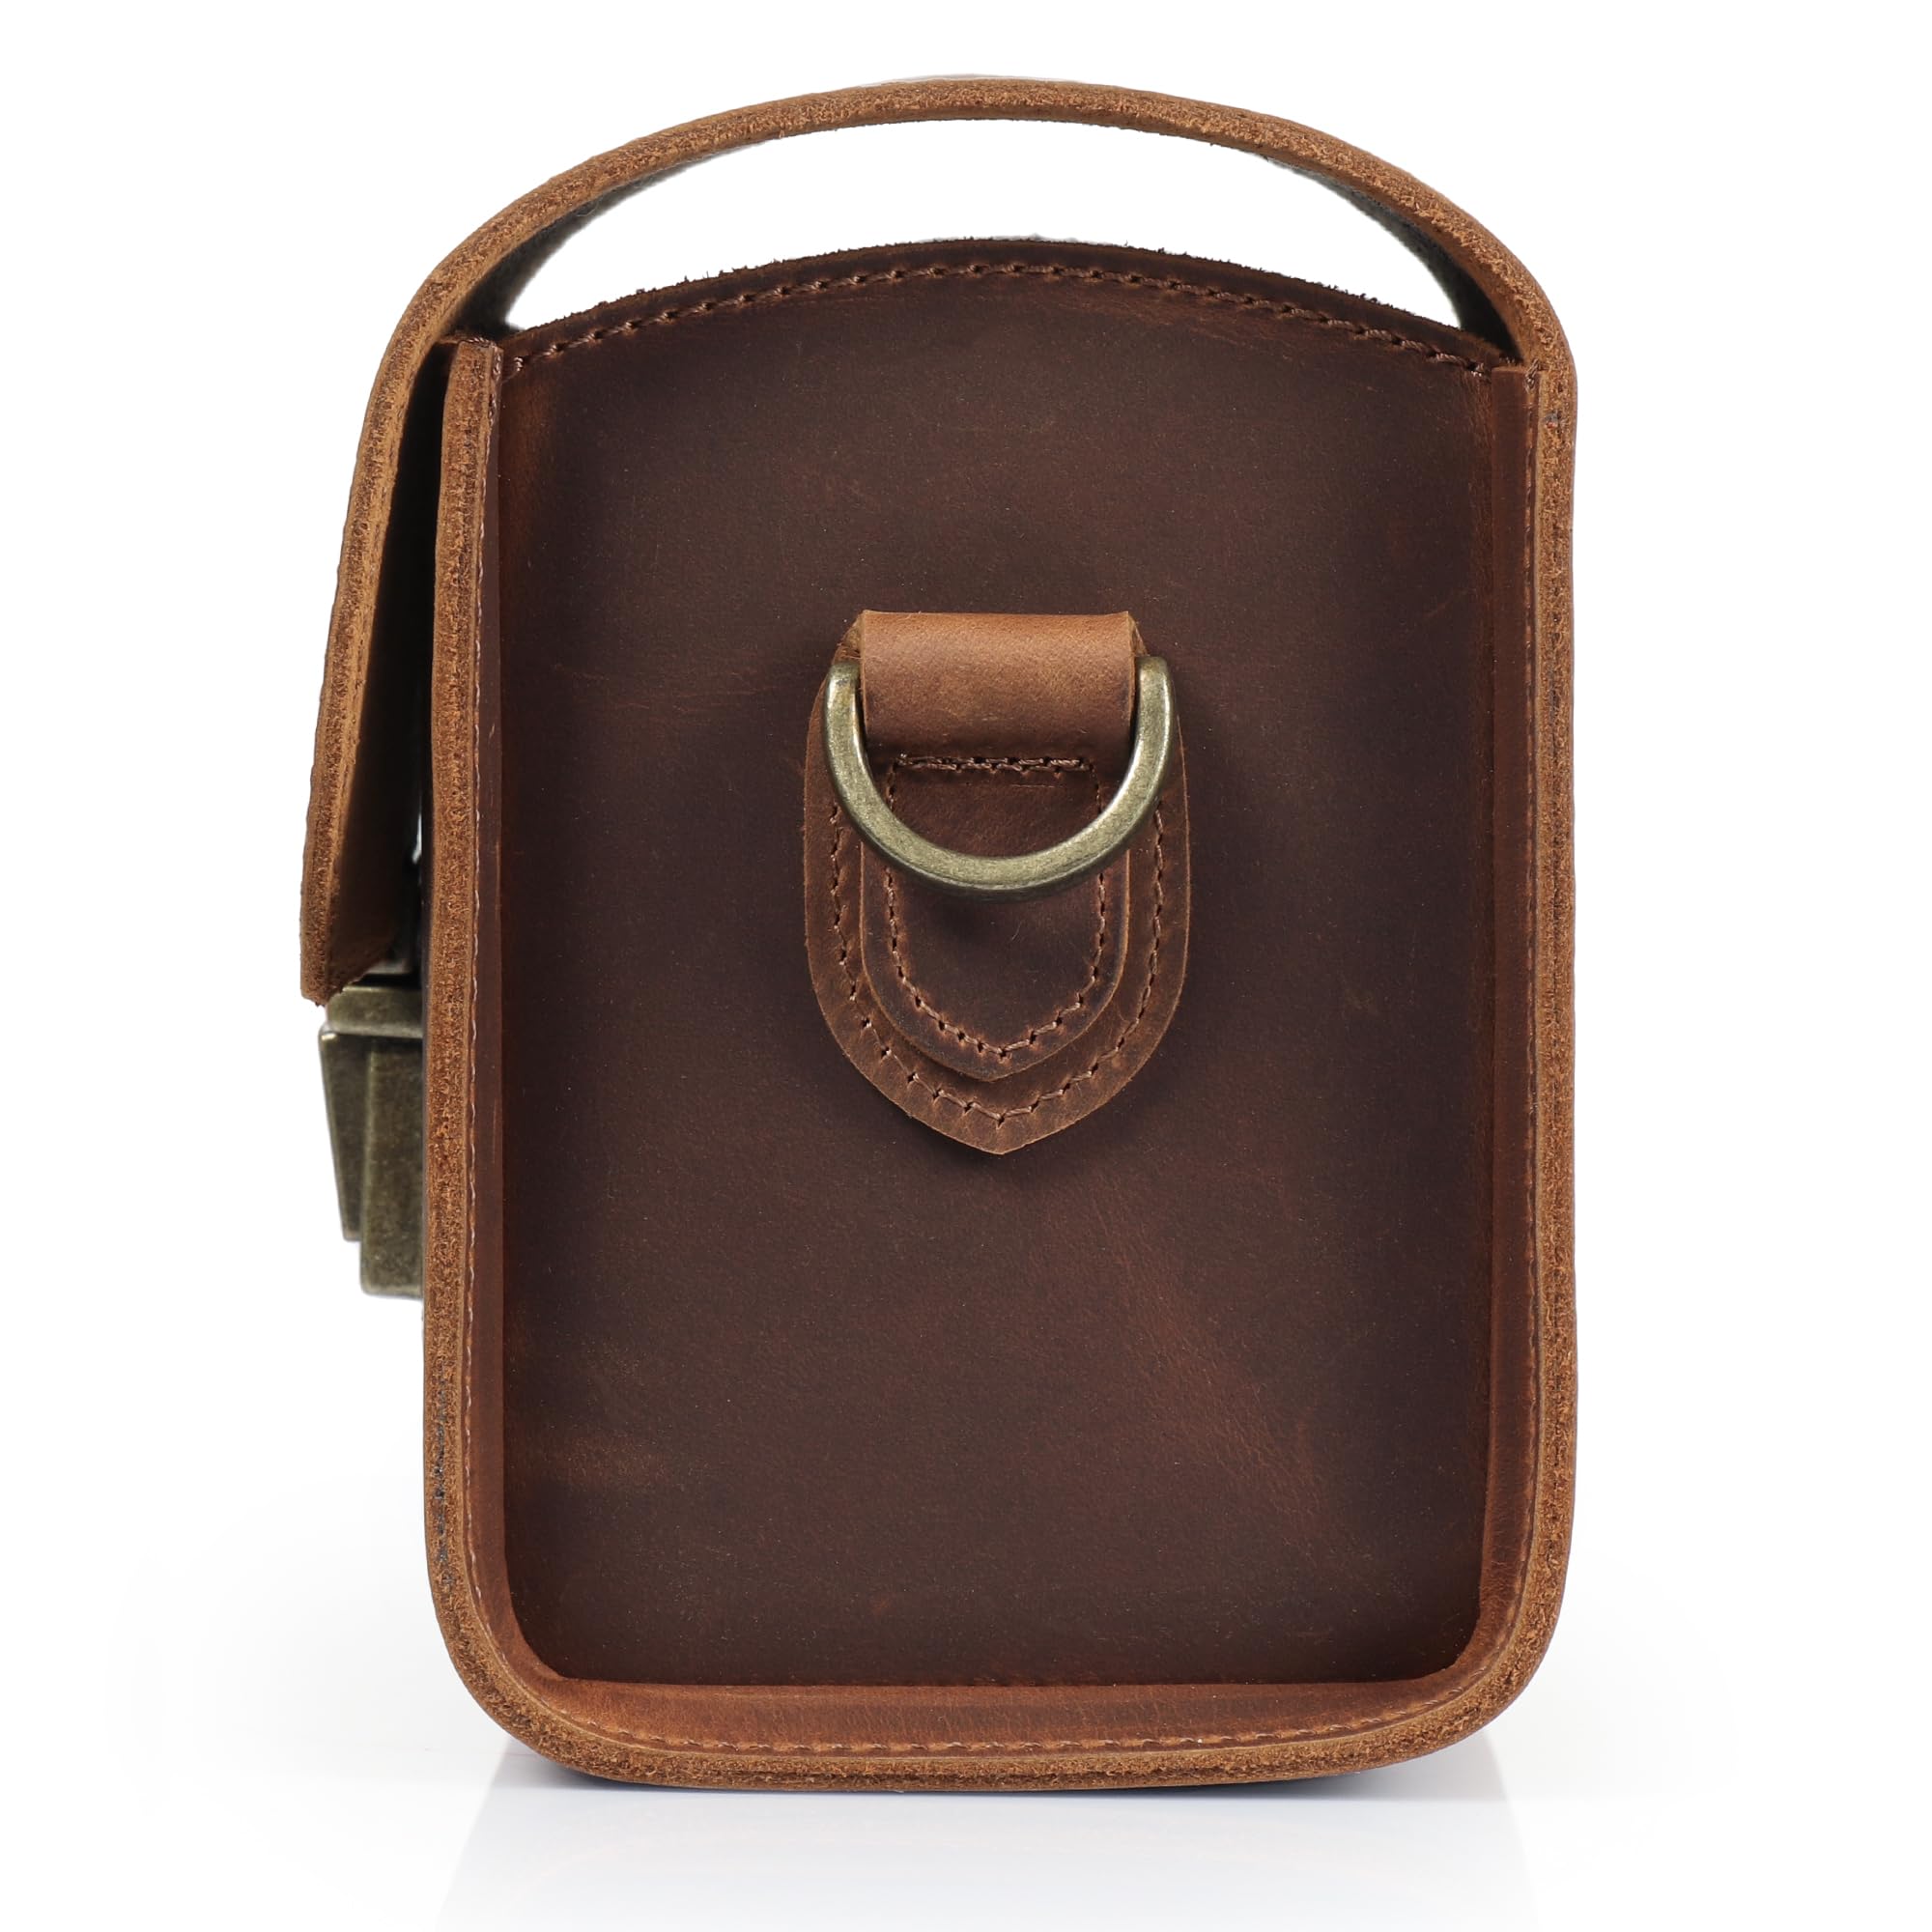 MegaGear Pebble MG1724 Genuine Leather Camera Messenger Bag for Mirrorless, Instant and DSLR Cameras - Cinnamon